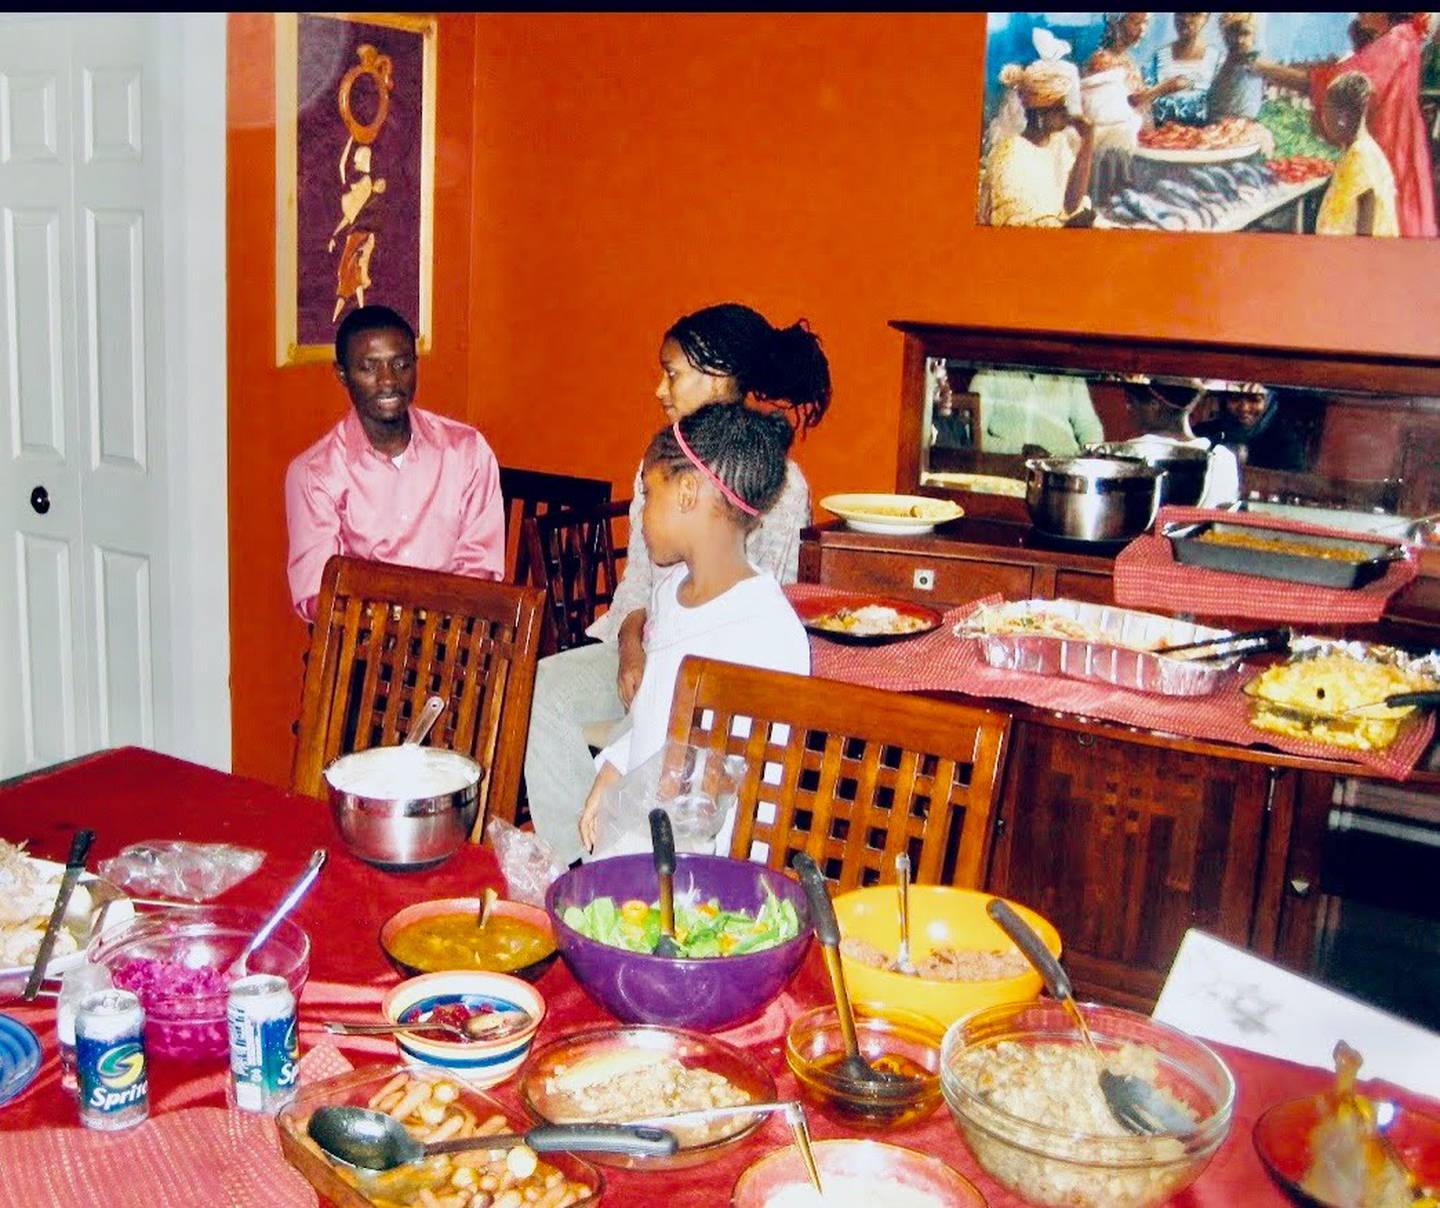 A child, man and woman stand behind a dining room table with a variety of Thanksgiving foods.